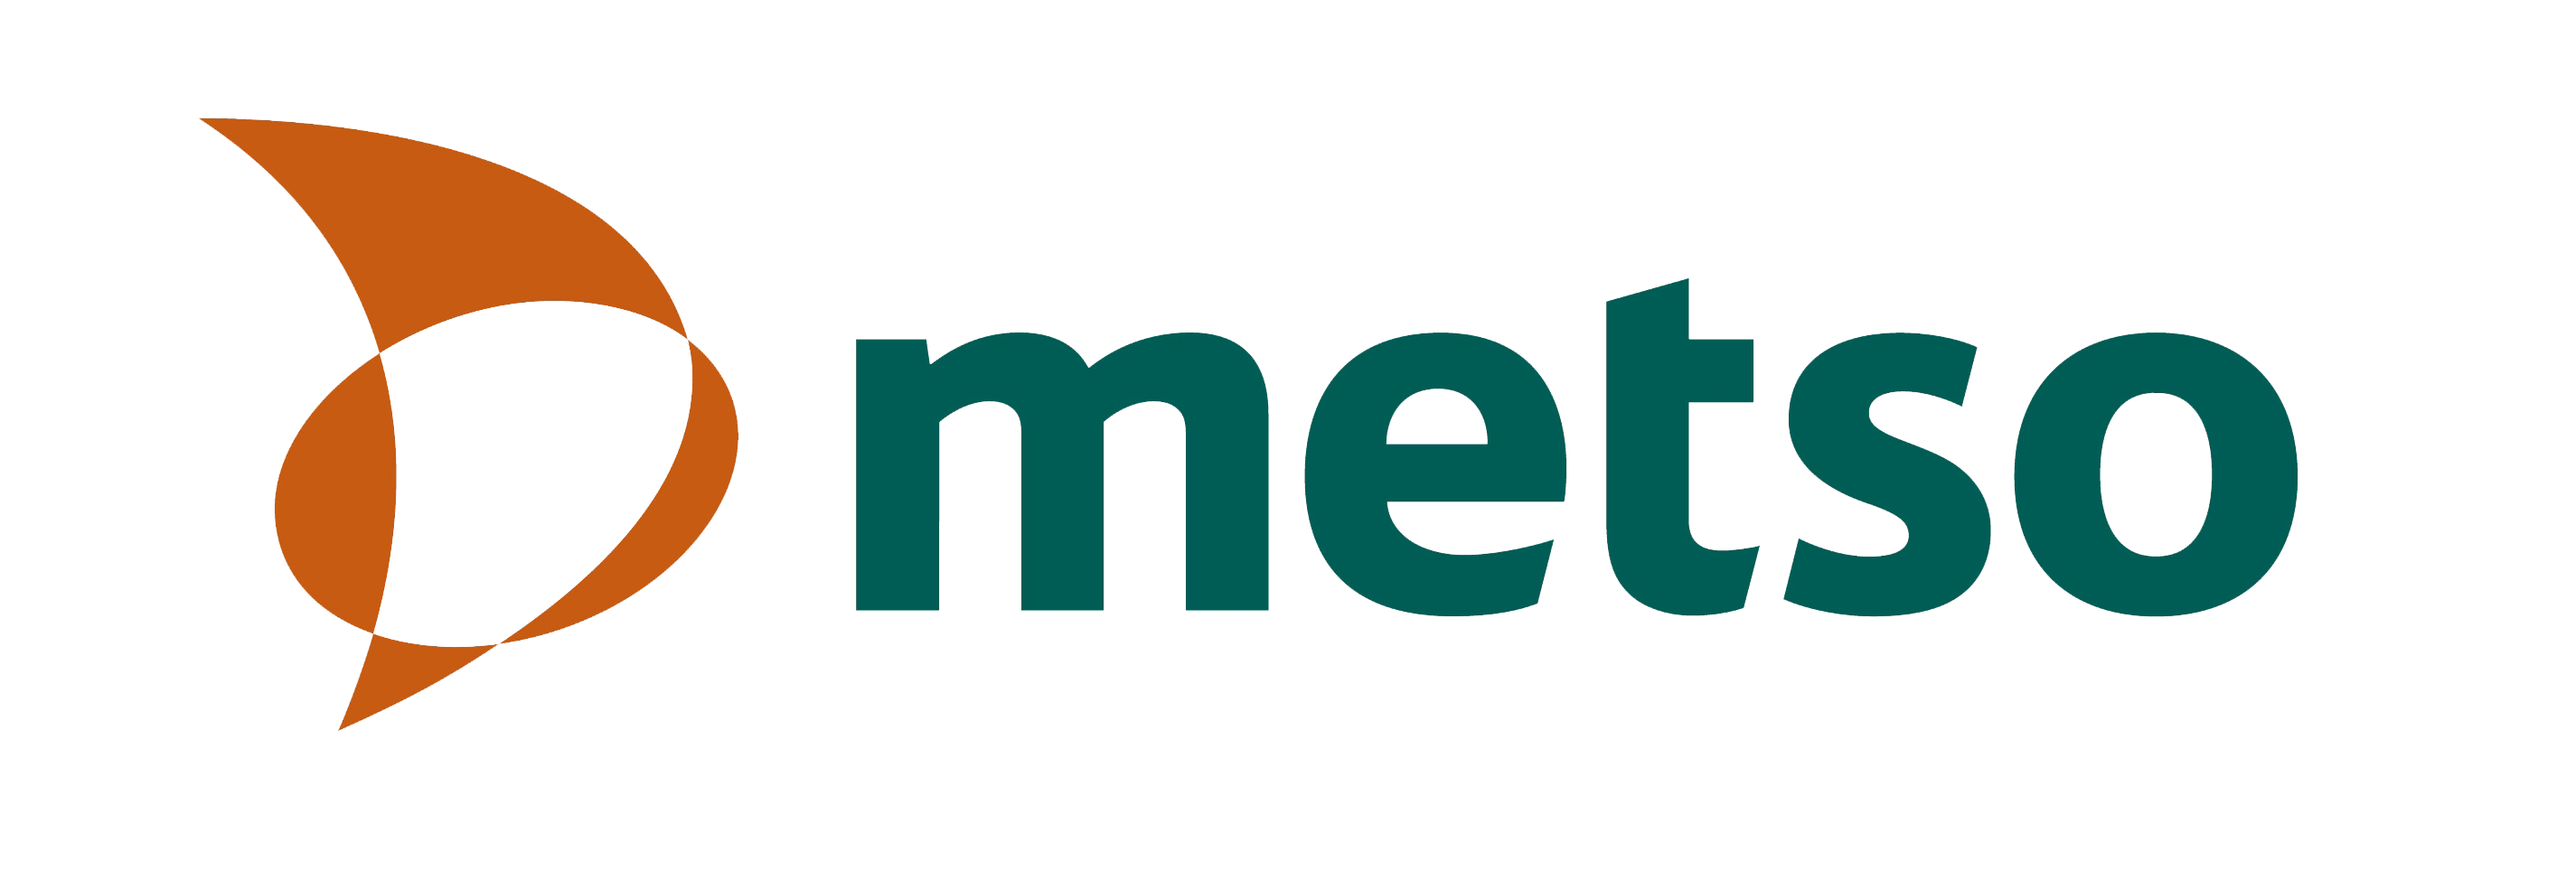 Metso wins recognition as a leading brand in the Brazilian mining sector for the second consecutive year